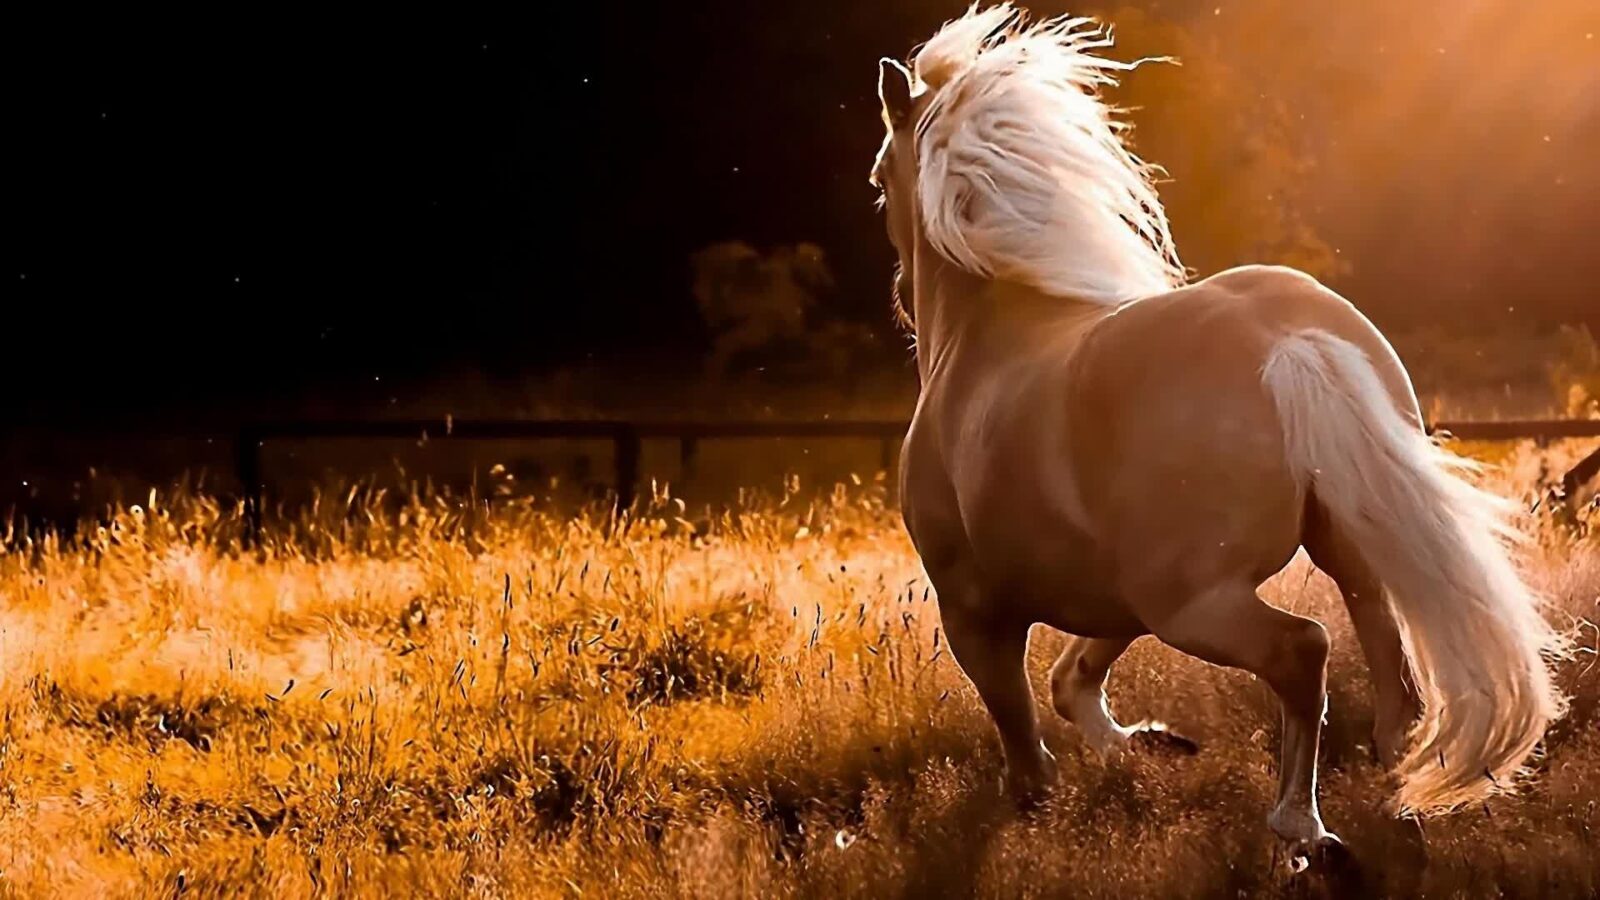 LiveWallpapers4Free.com | Running Horse Wind and Field - Free Live Wallpaper